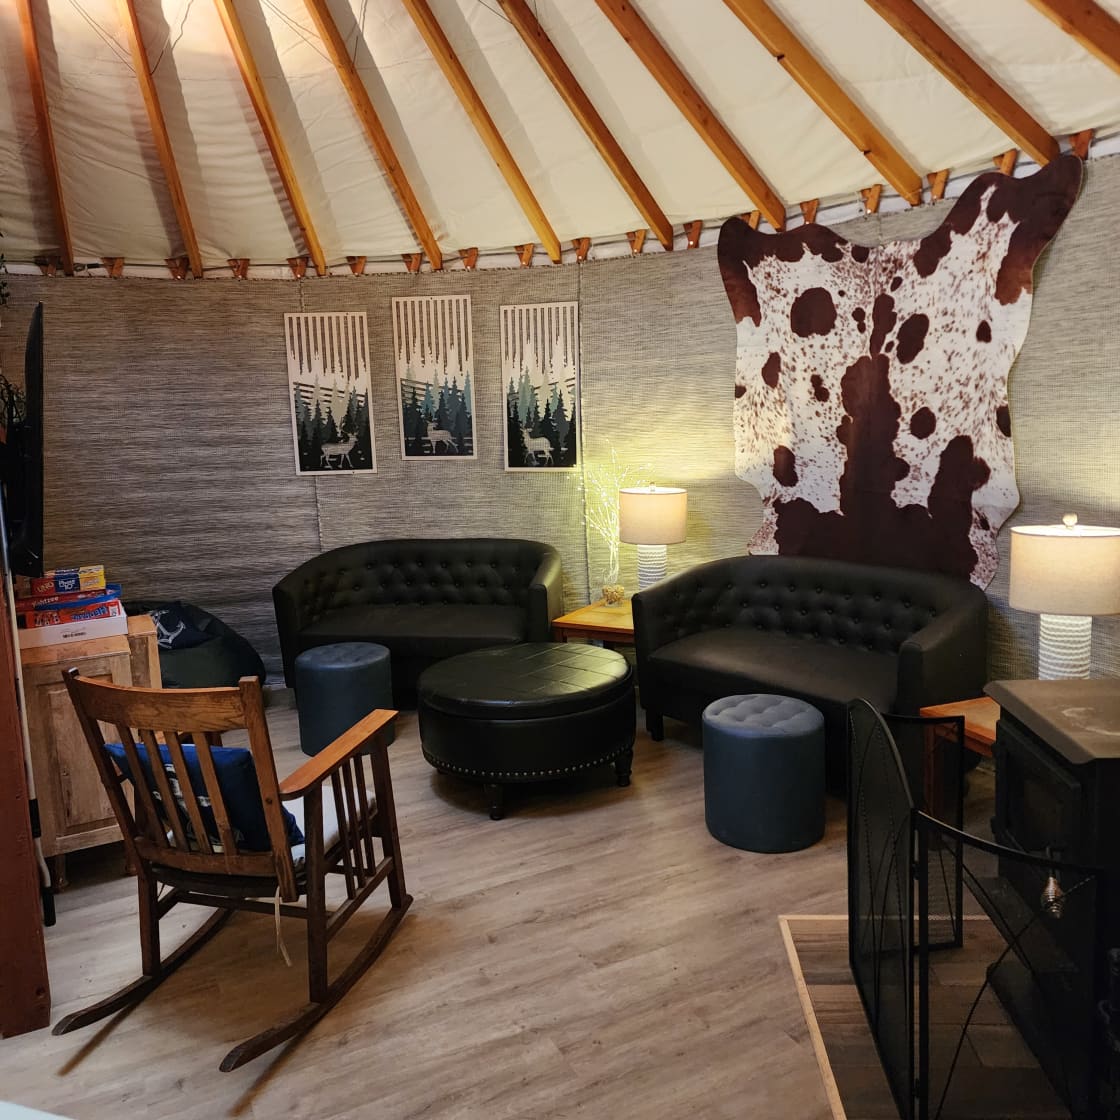 Yurt Livingroom, seats 6. Has a real sturdy rocking chair, two loveseats and a leather bean bag chair. 